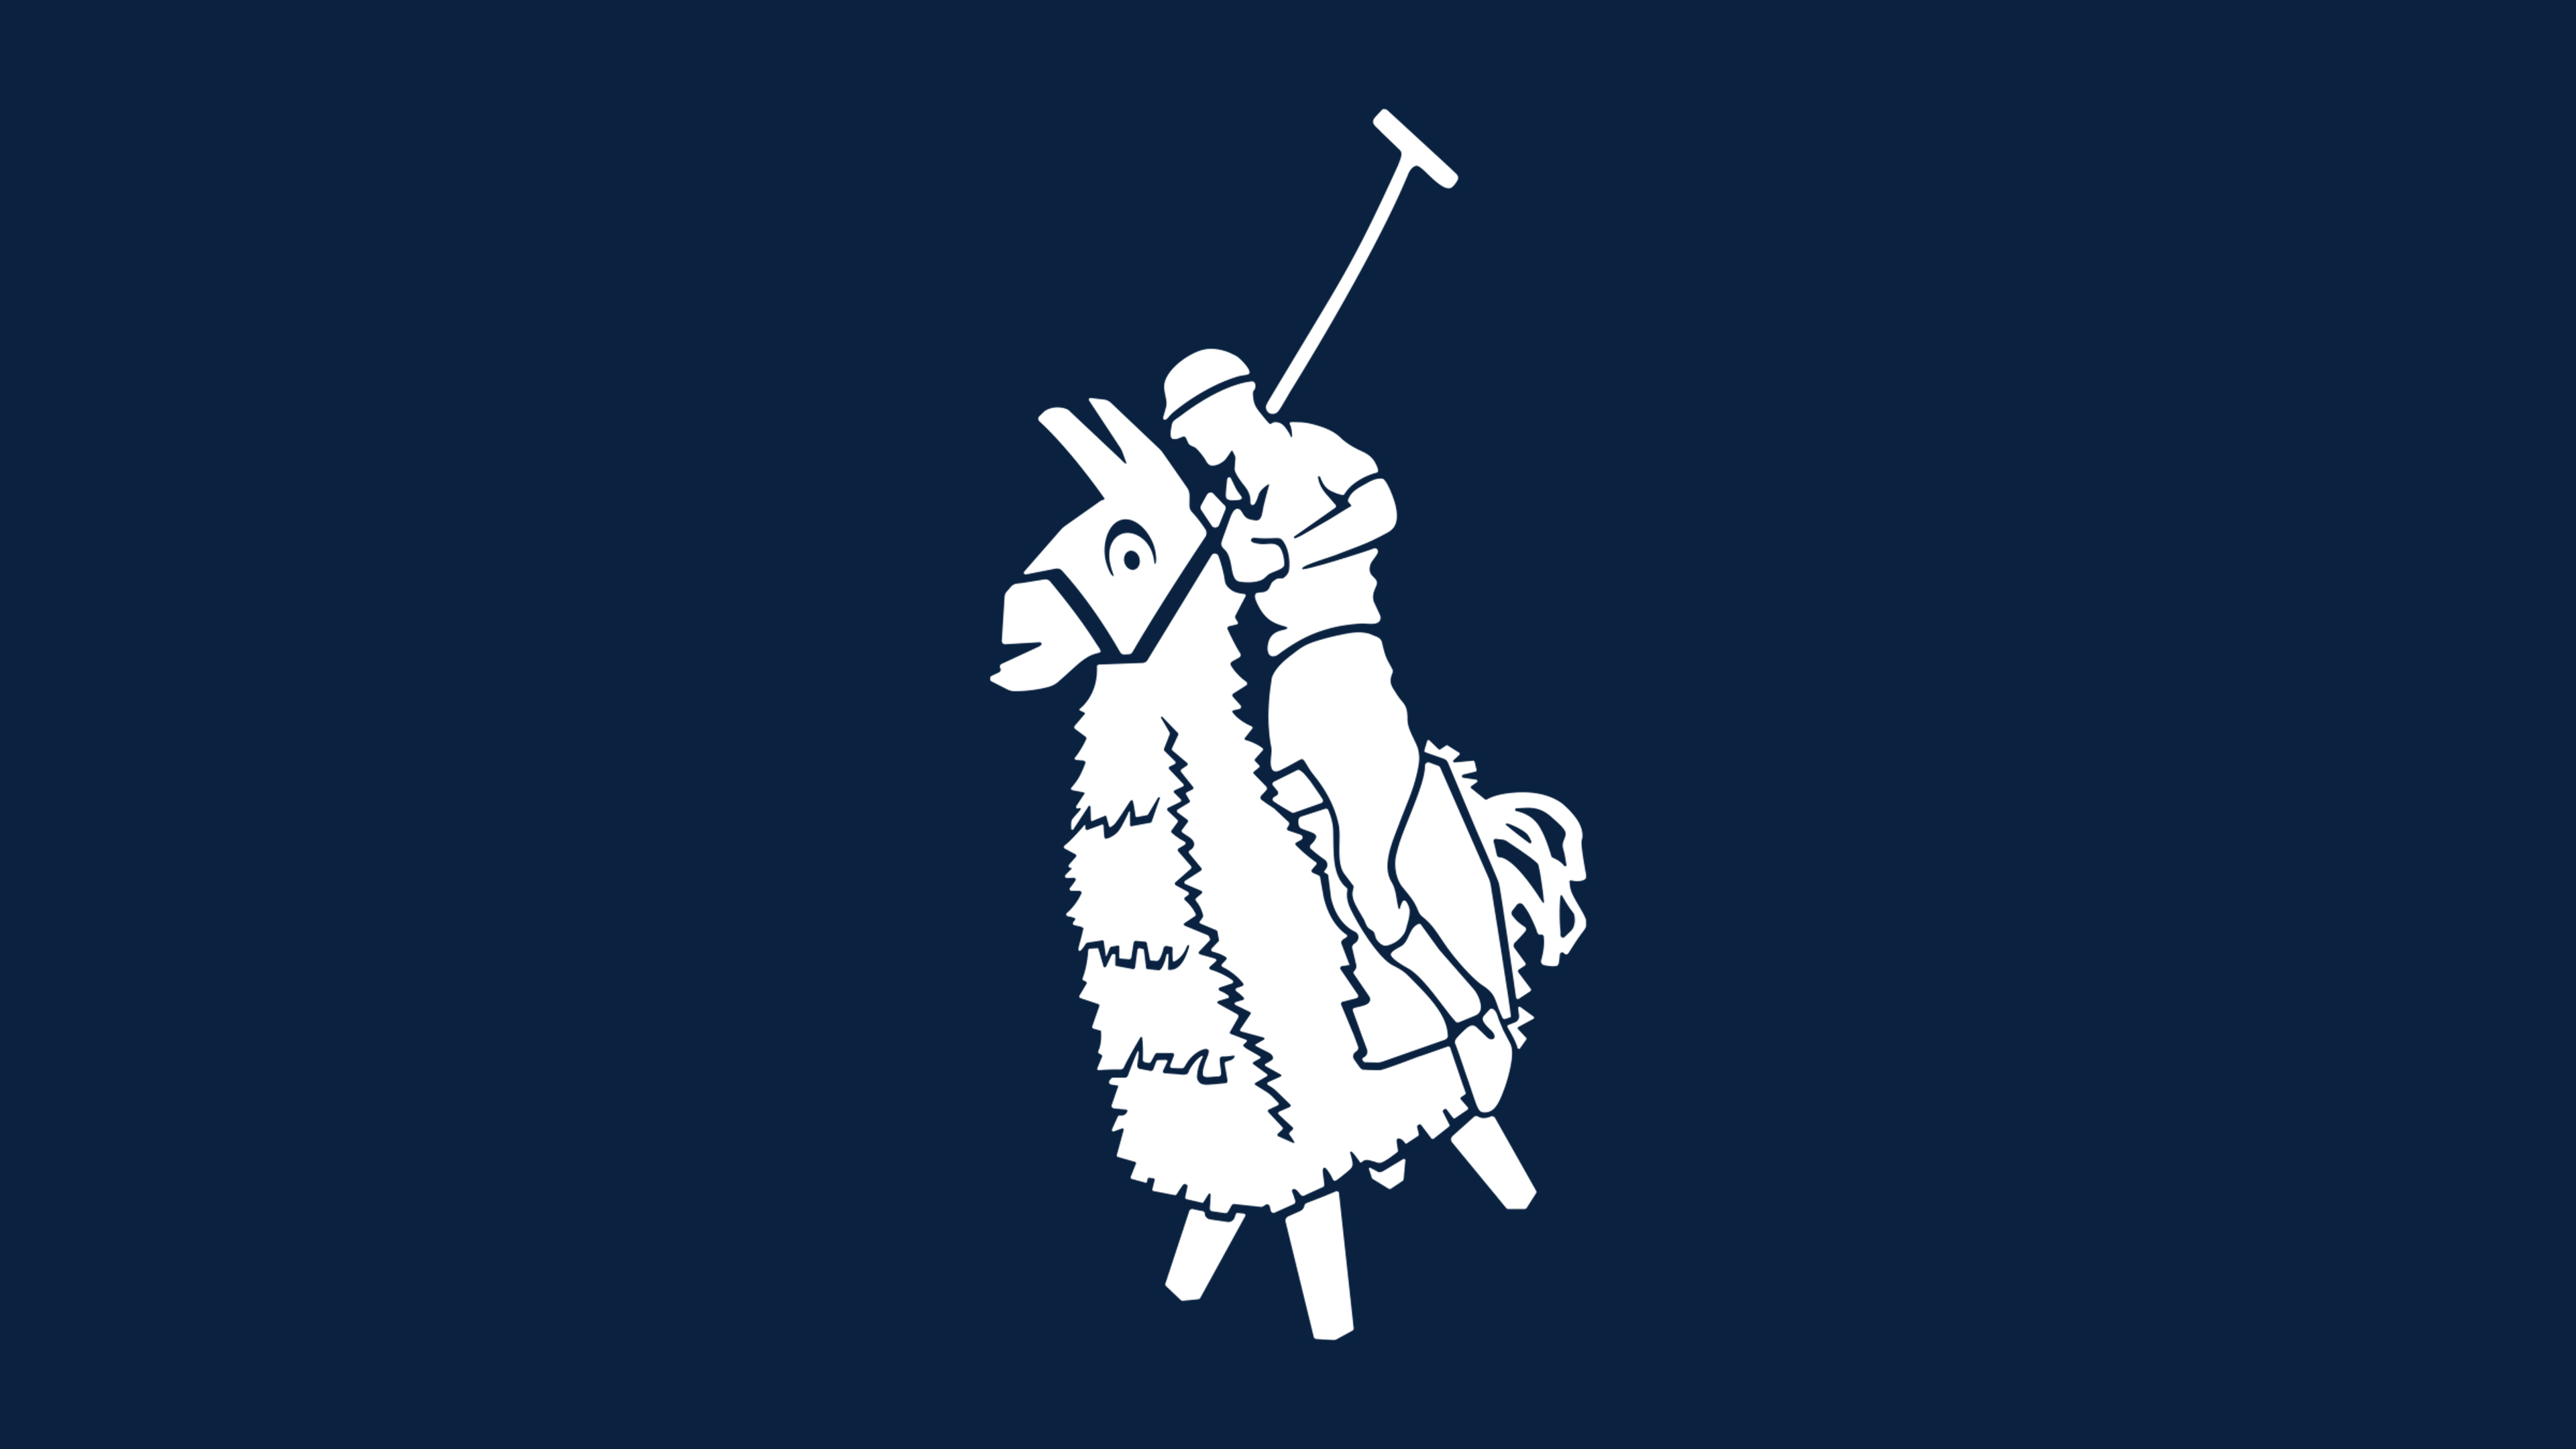 Ralph Lauren's new Polo logo for its collection with Fortnite